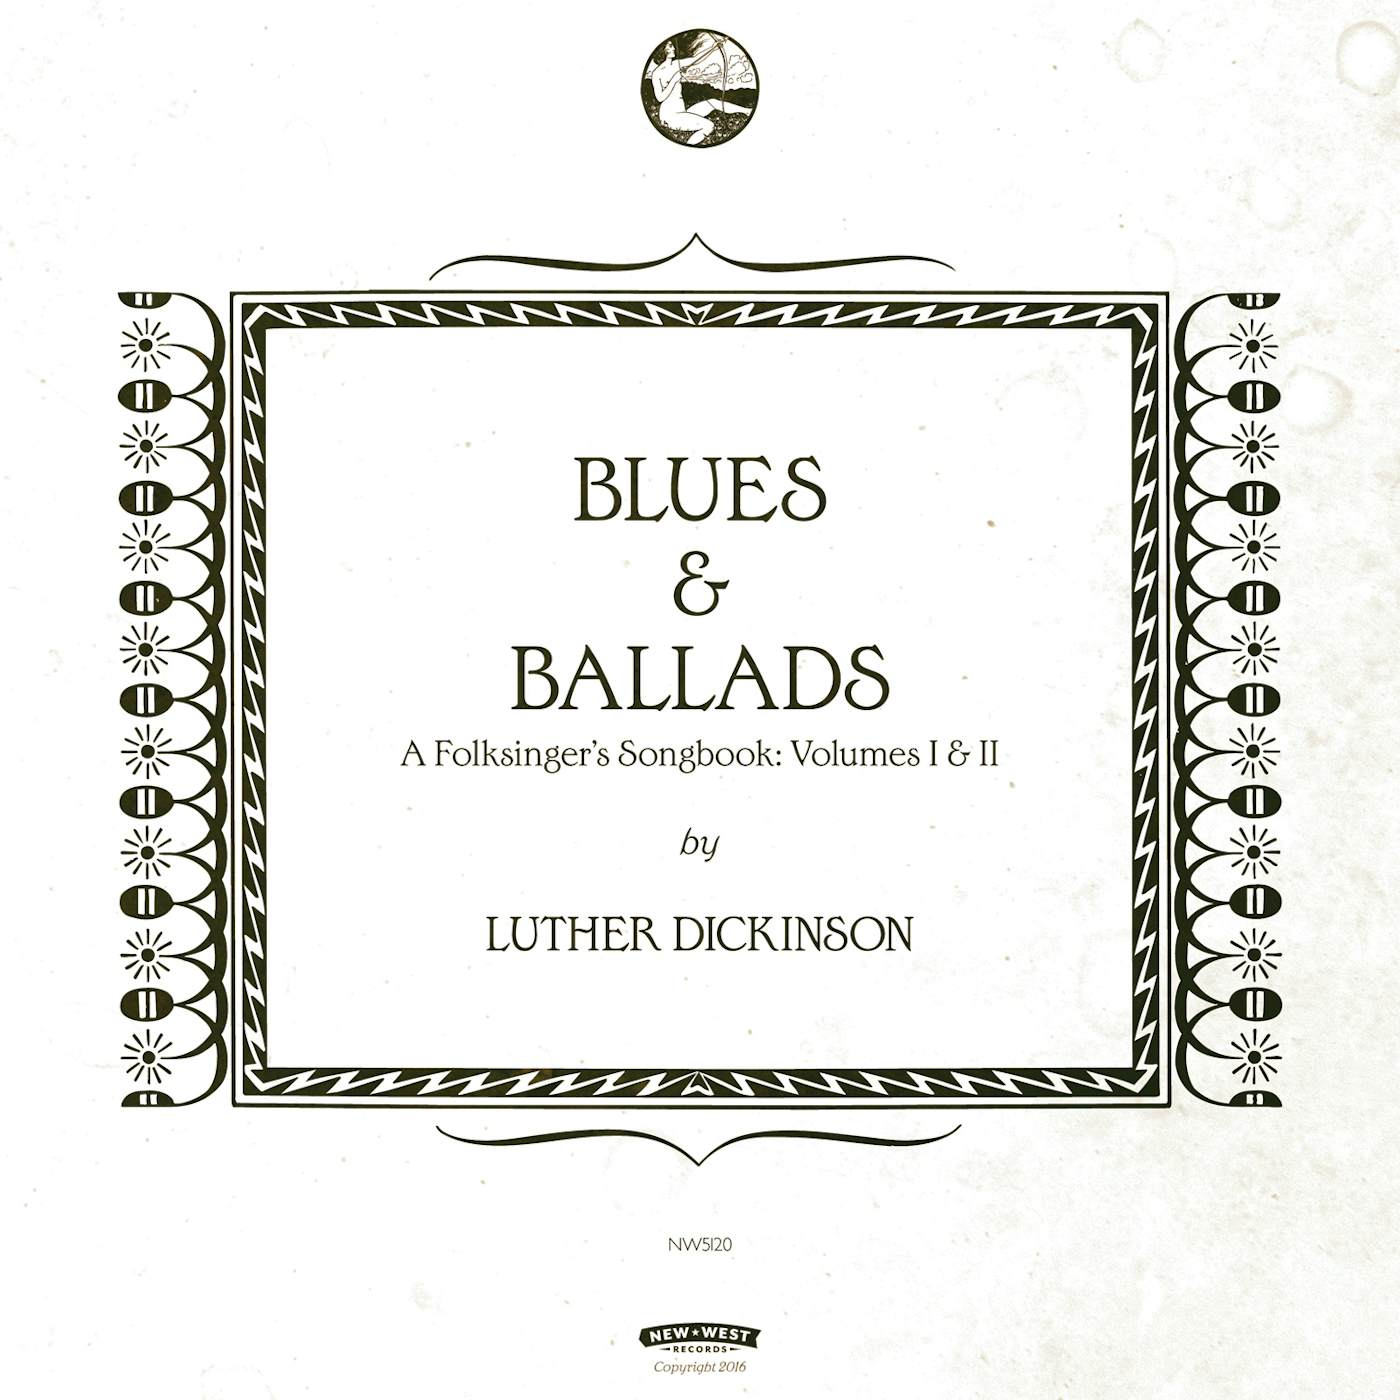 Luther Dickinson BLUES & BALLADS (A FOLKSINGER'S SONGBOOK) I & II CD